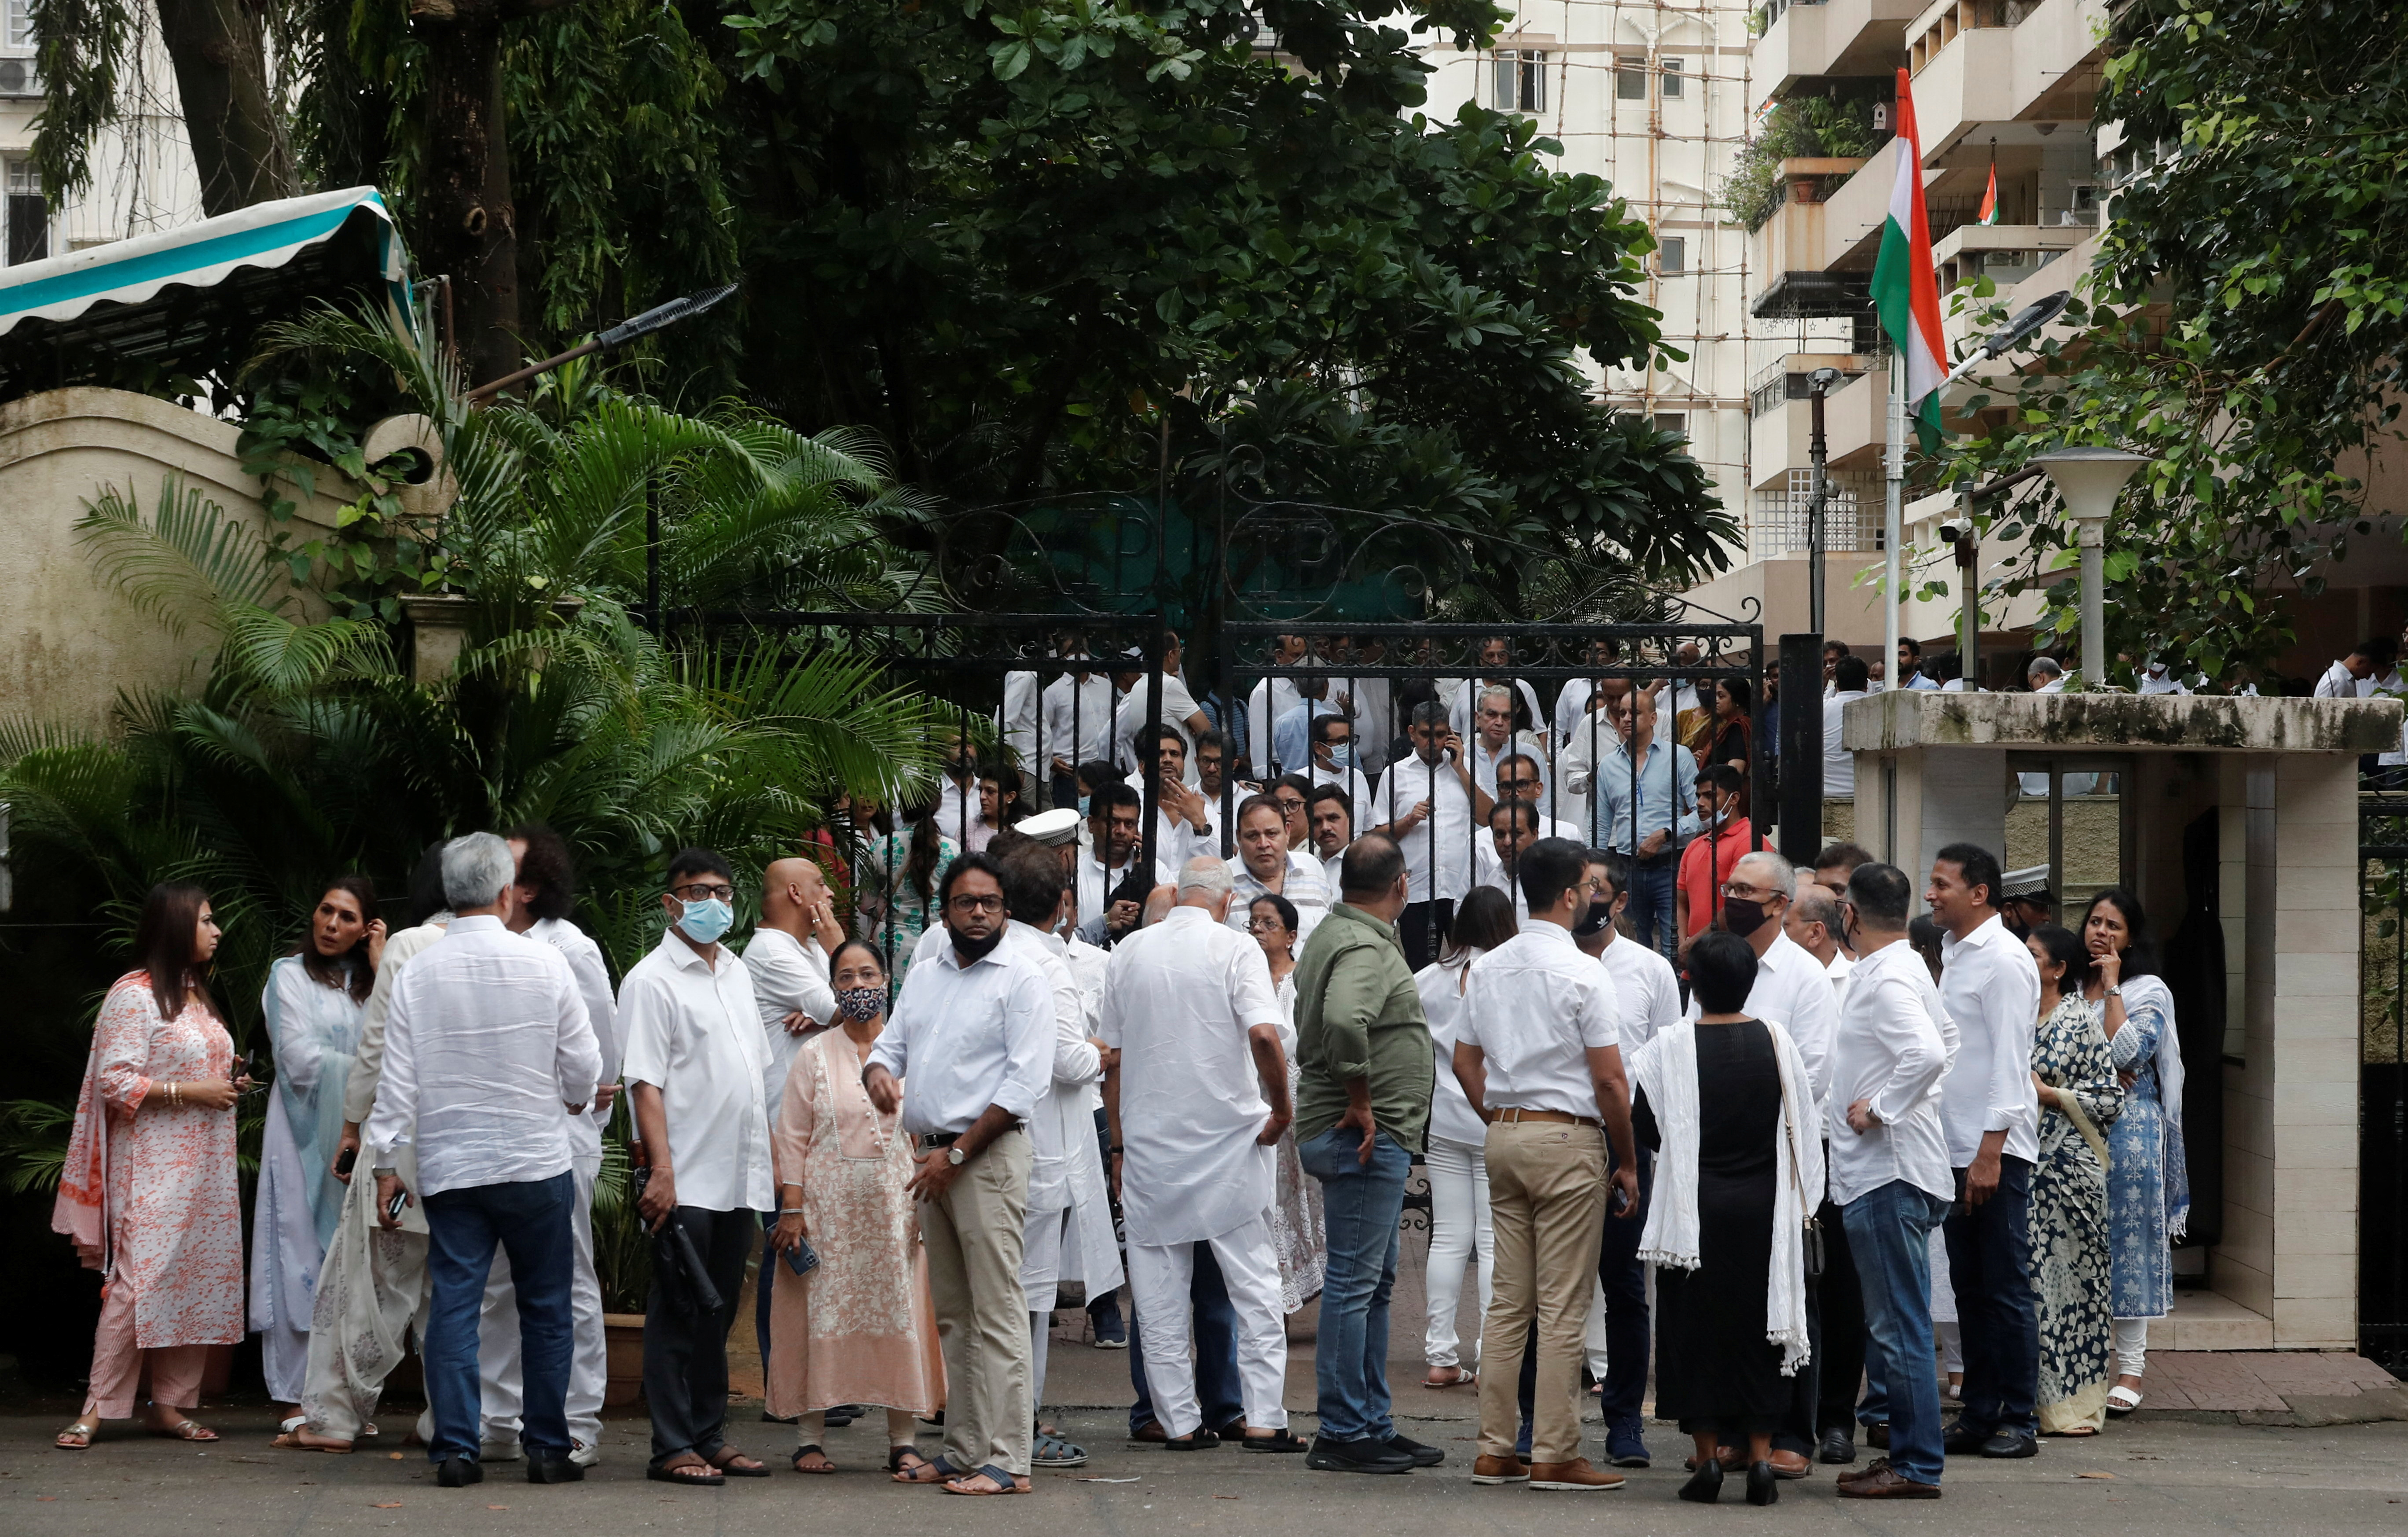 People are seen outside the residence of the late Indian billionaire Rakesh Jonghunwala to pay his respects after his death today in Mumbai, India, August 14, 2022. REUTERS/Francis Mascarenhas